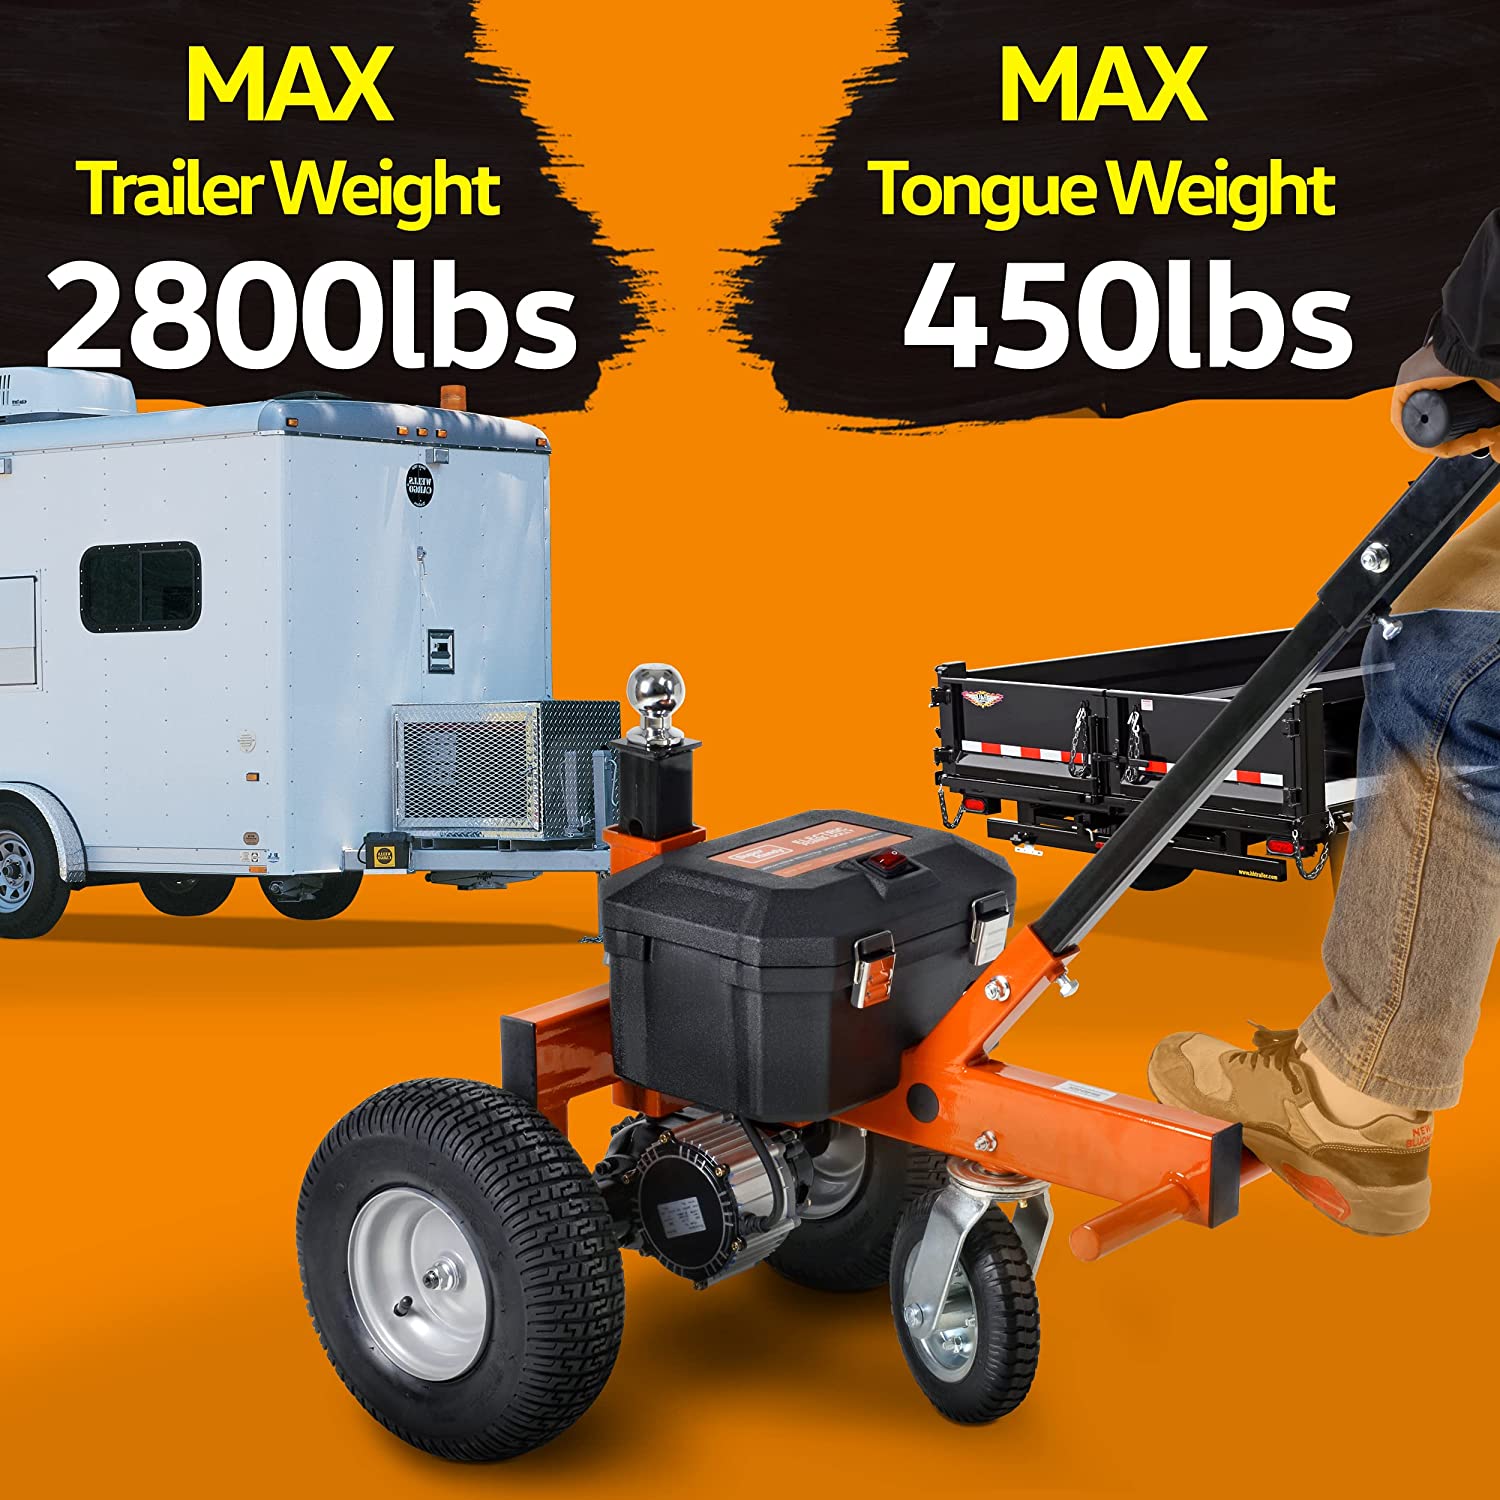 Super Handy, Super Handy GUO041 Electric Trailer Dolly 800W 12V 7Ah 2" Ball Mount 2800 lbs Max Trailer Weight Capacity New